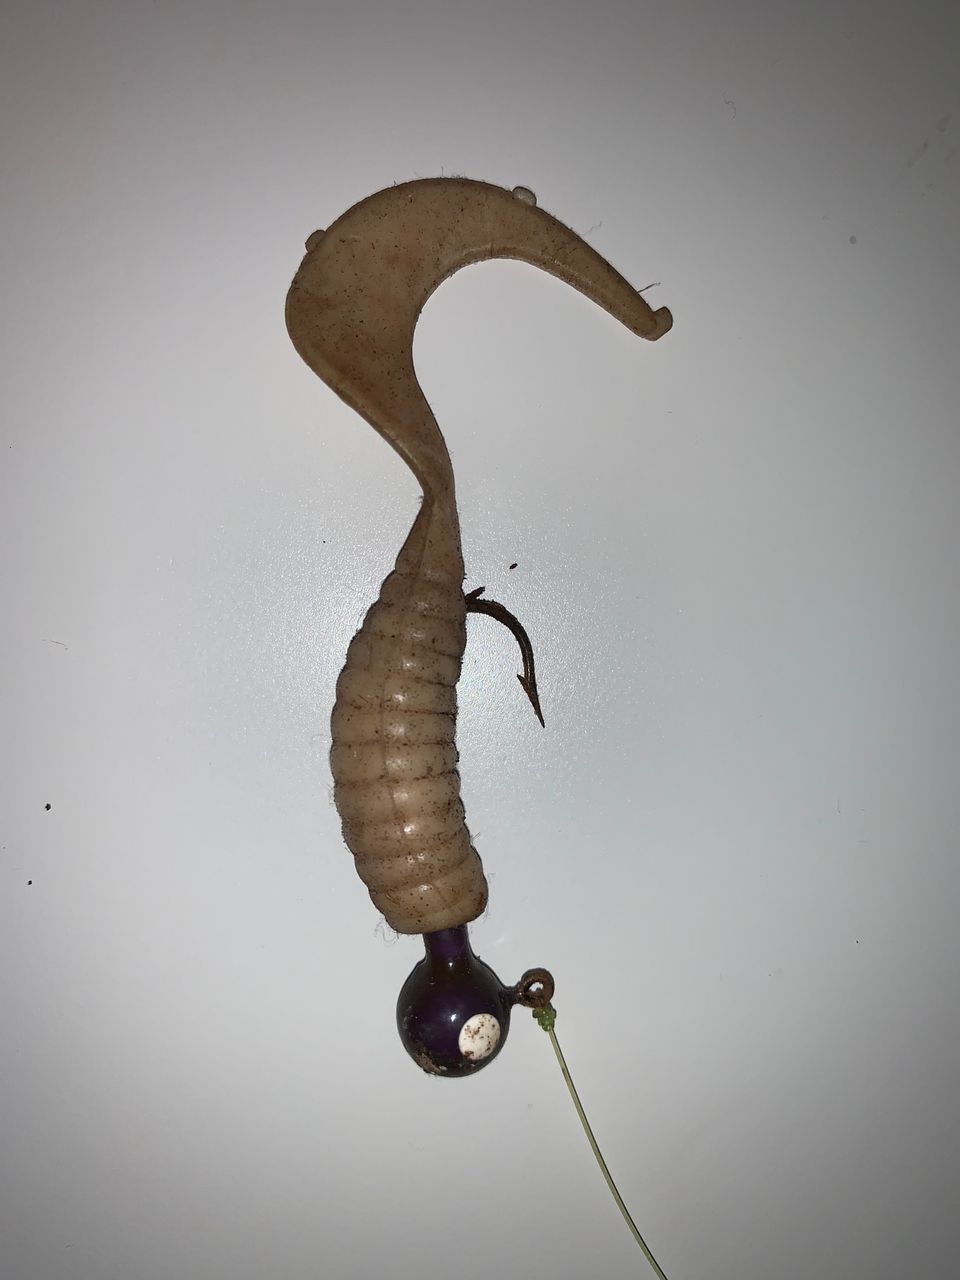 Does anyone know what this lure could be used for? I just picked up a rod from someone who was throwing it away and it had this.